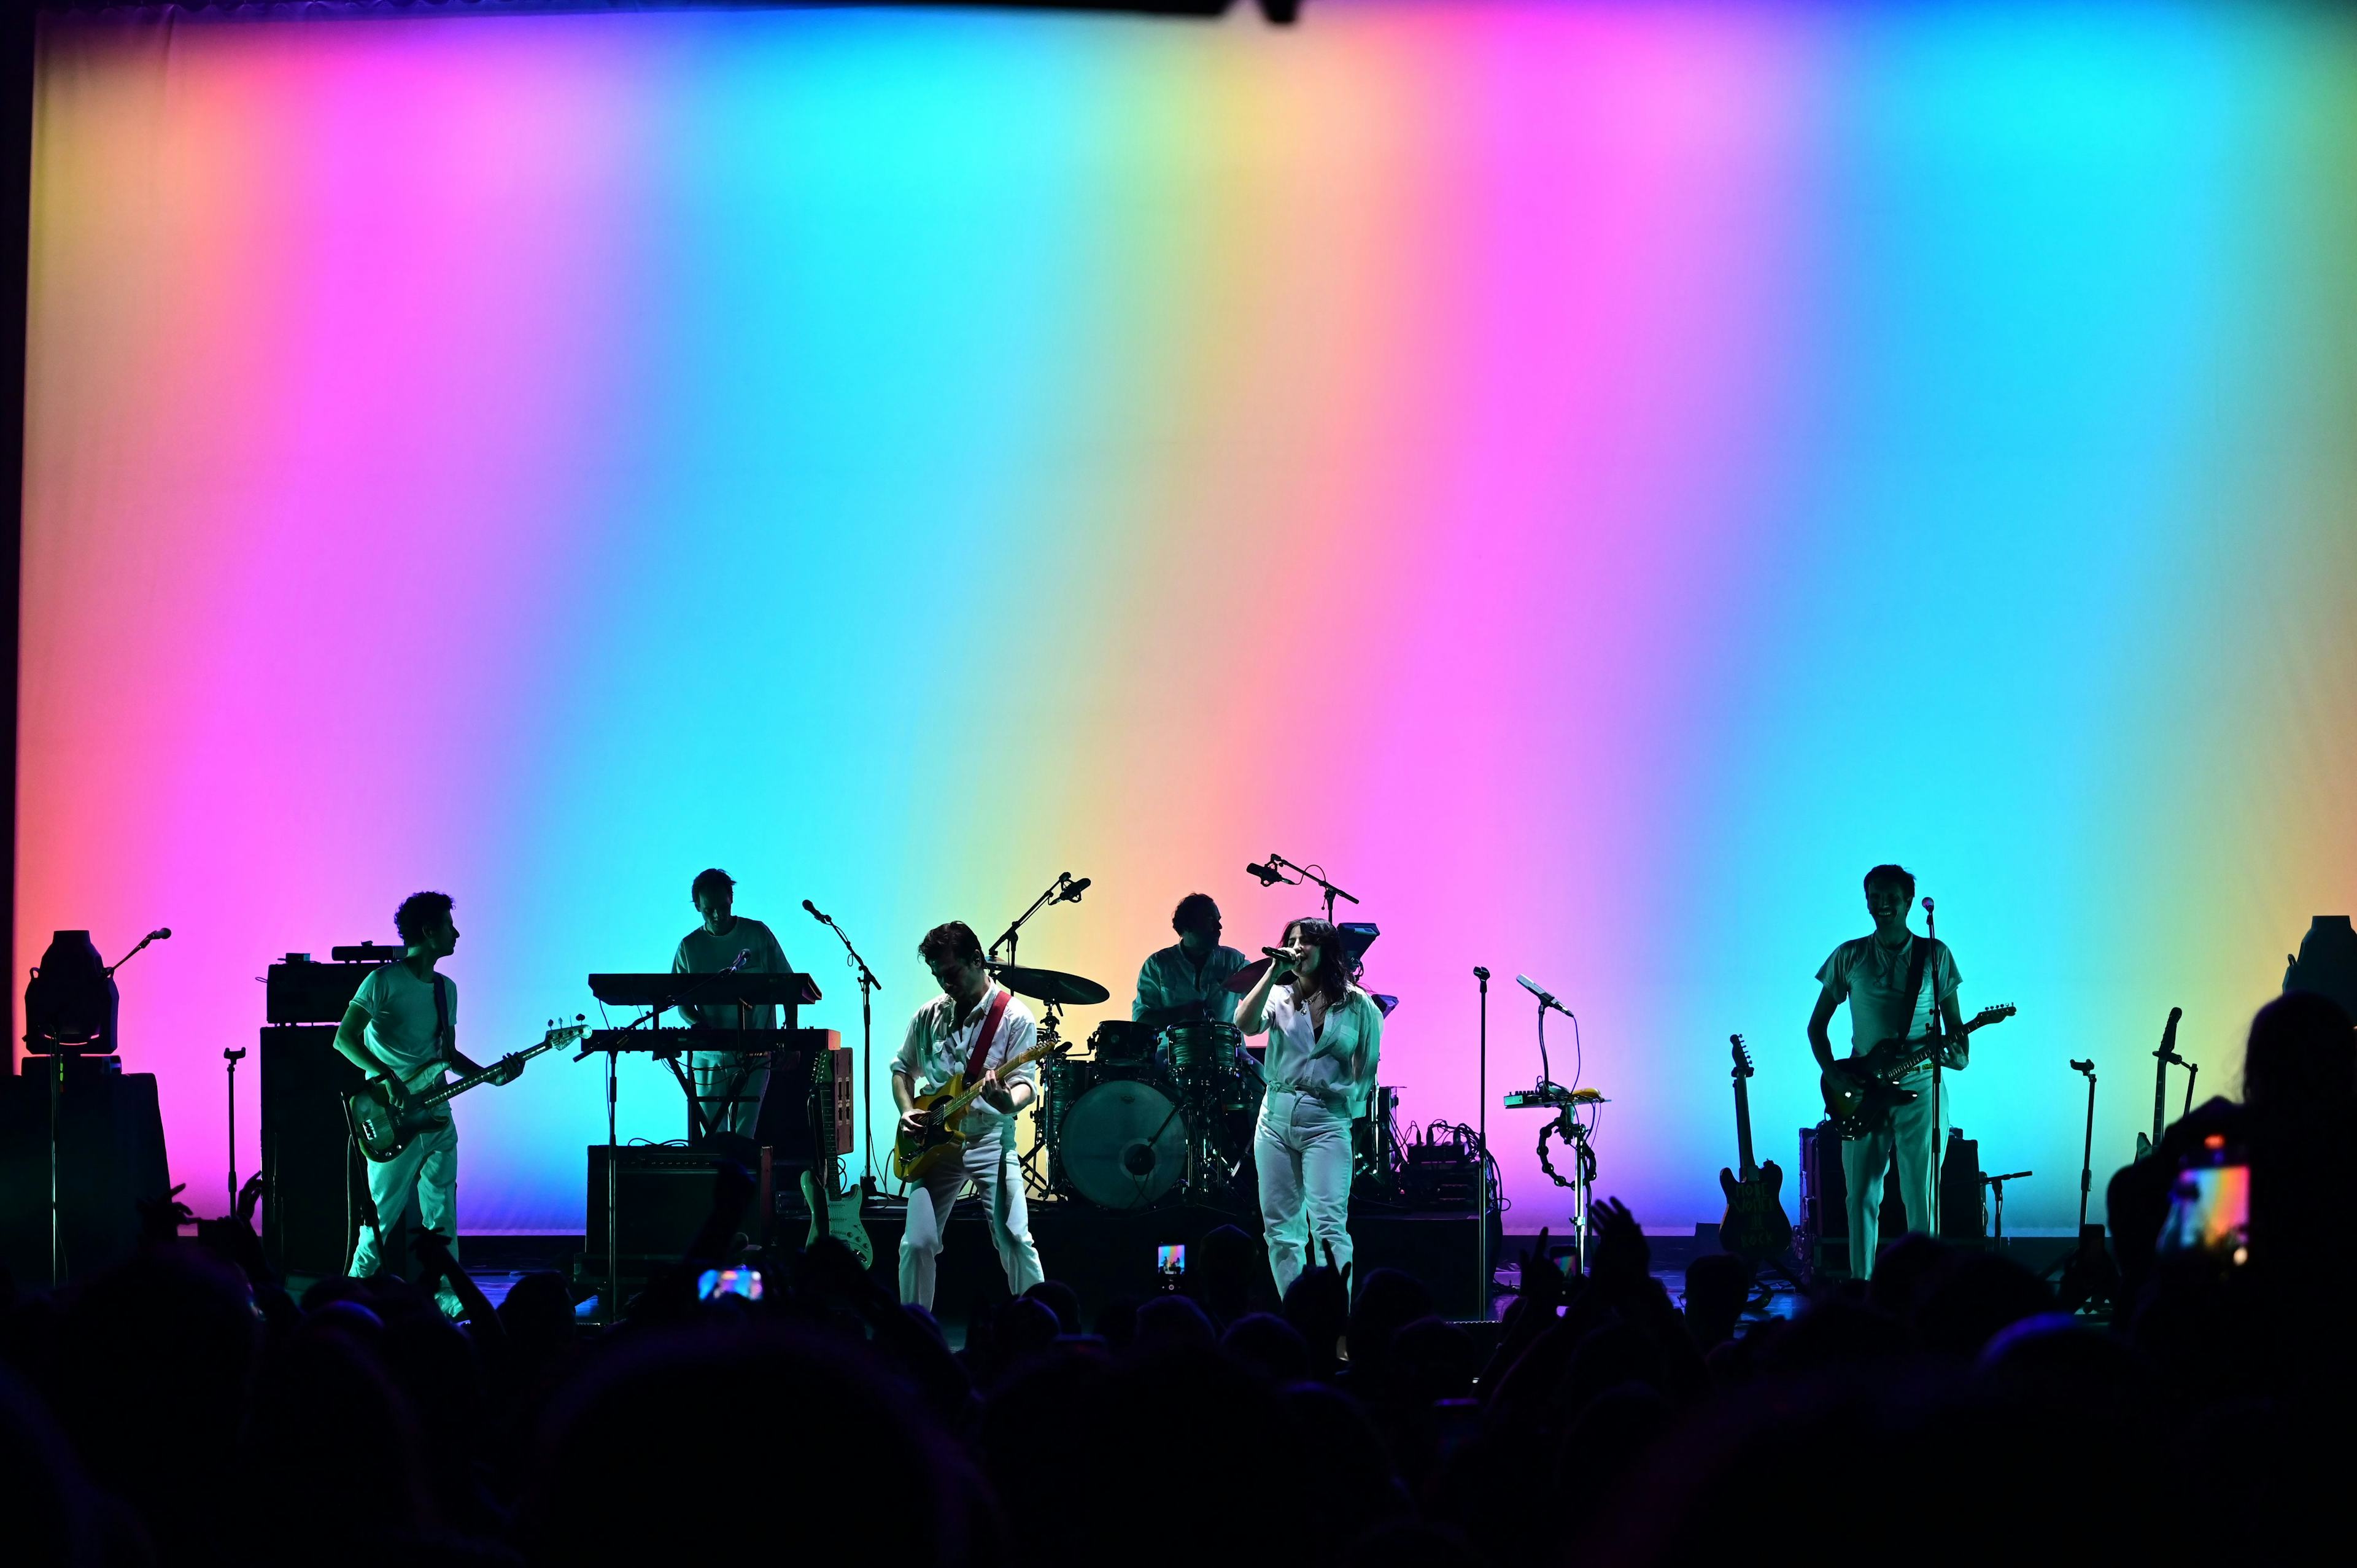  Lilly Wood & The Prick, 2021 Tour, Olympia, Scenography, Light Design, Cyclo, Dalis